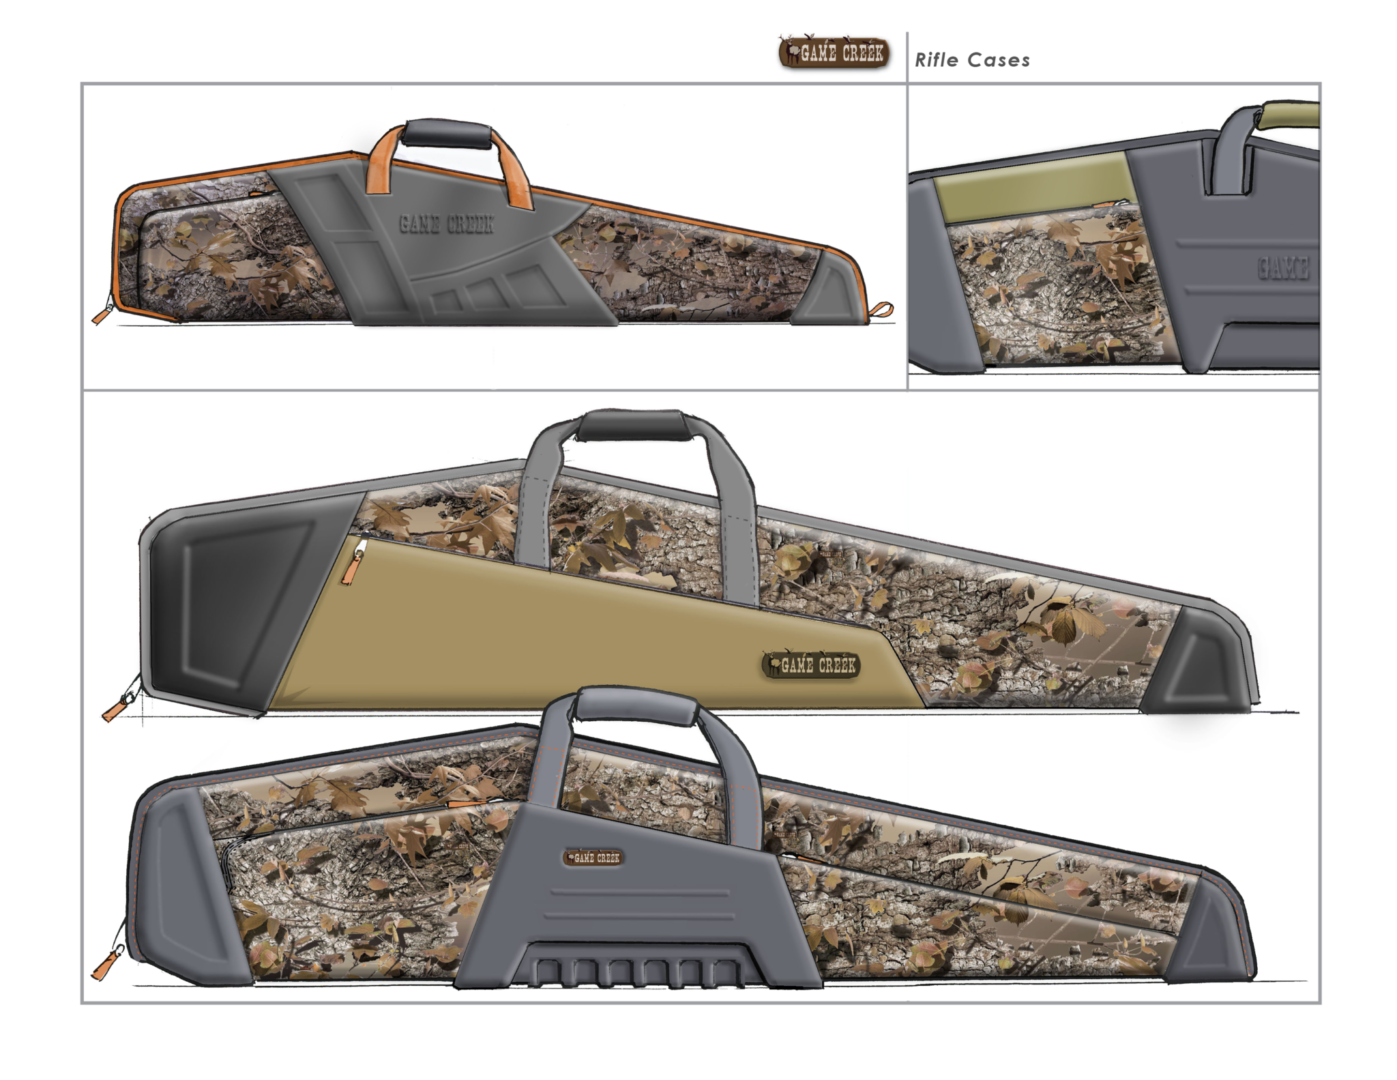 Game Creek Rifle Cases